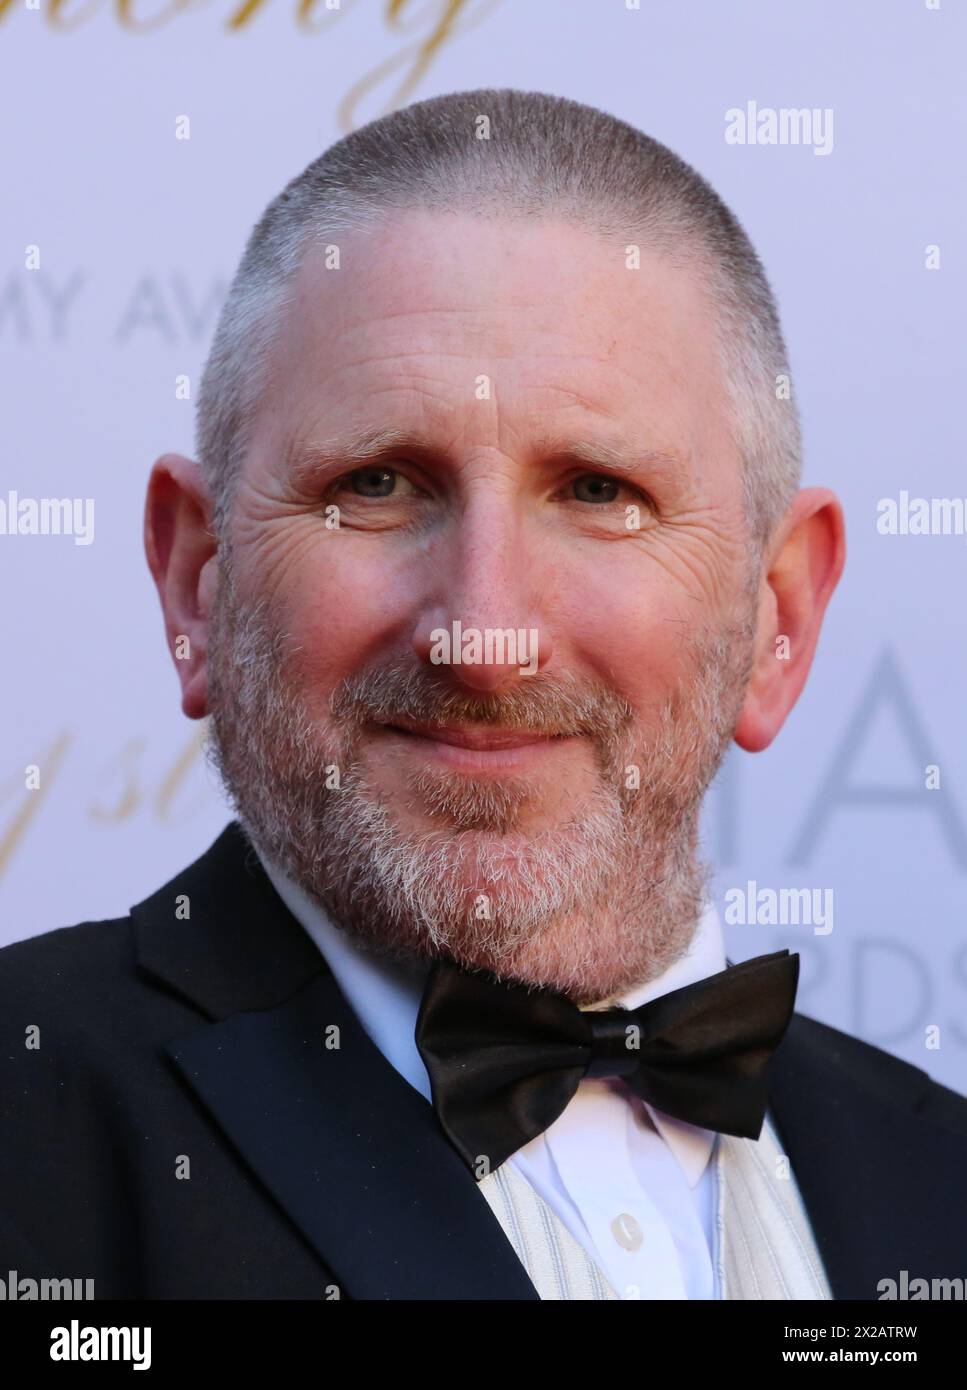 Dublin, Ireland. 20th April 2024. Producer Paul FitzSimons arriving on the red carpet at the Irish Film and Television Awards (IFTA), Dublin Royal Convention Centre. Credit: Doreen Kennedy/Alamy Live News. Stock Photo